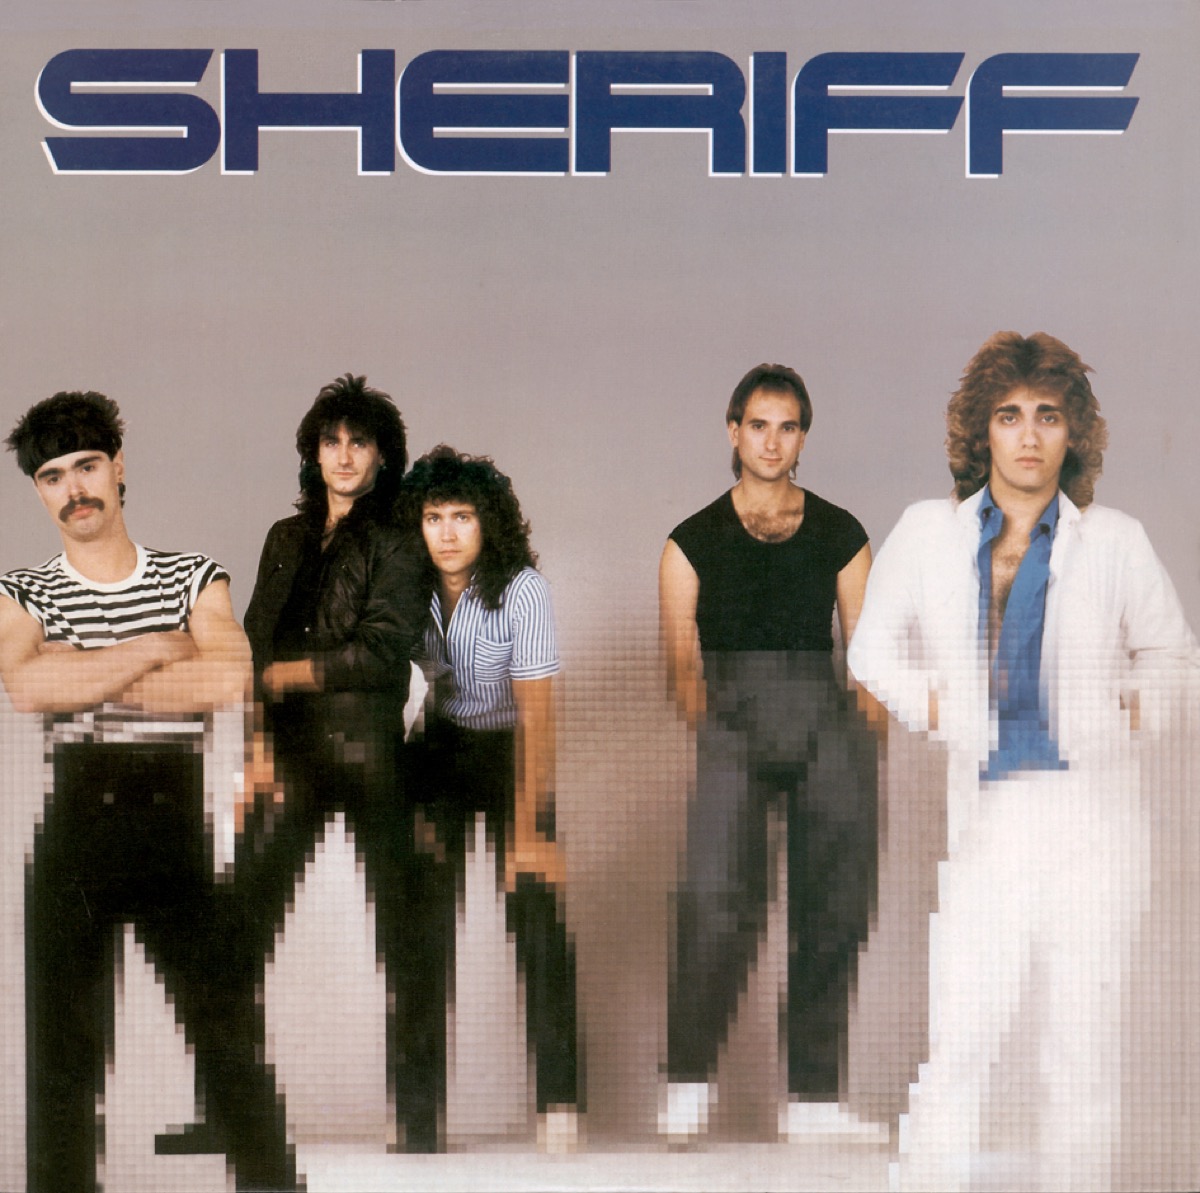 album cover of sheriff by sheriff